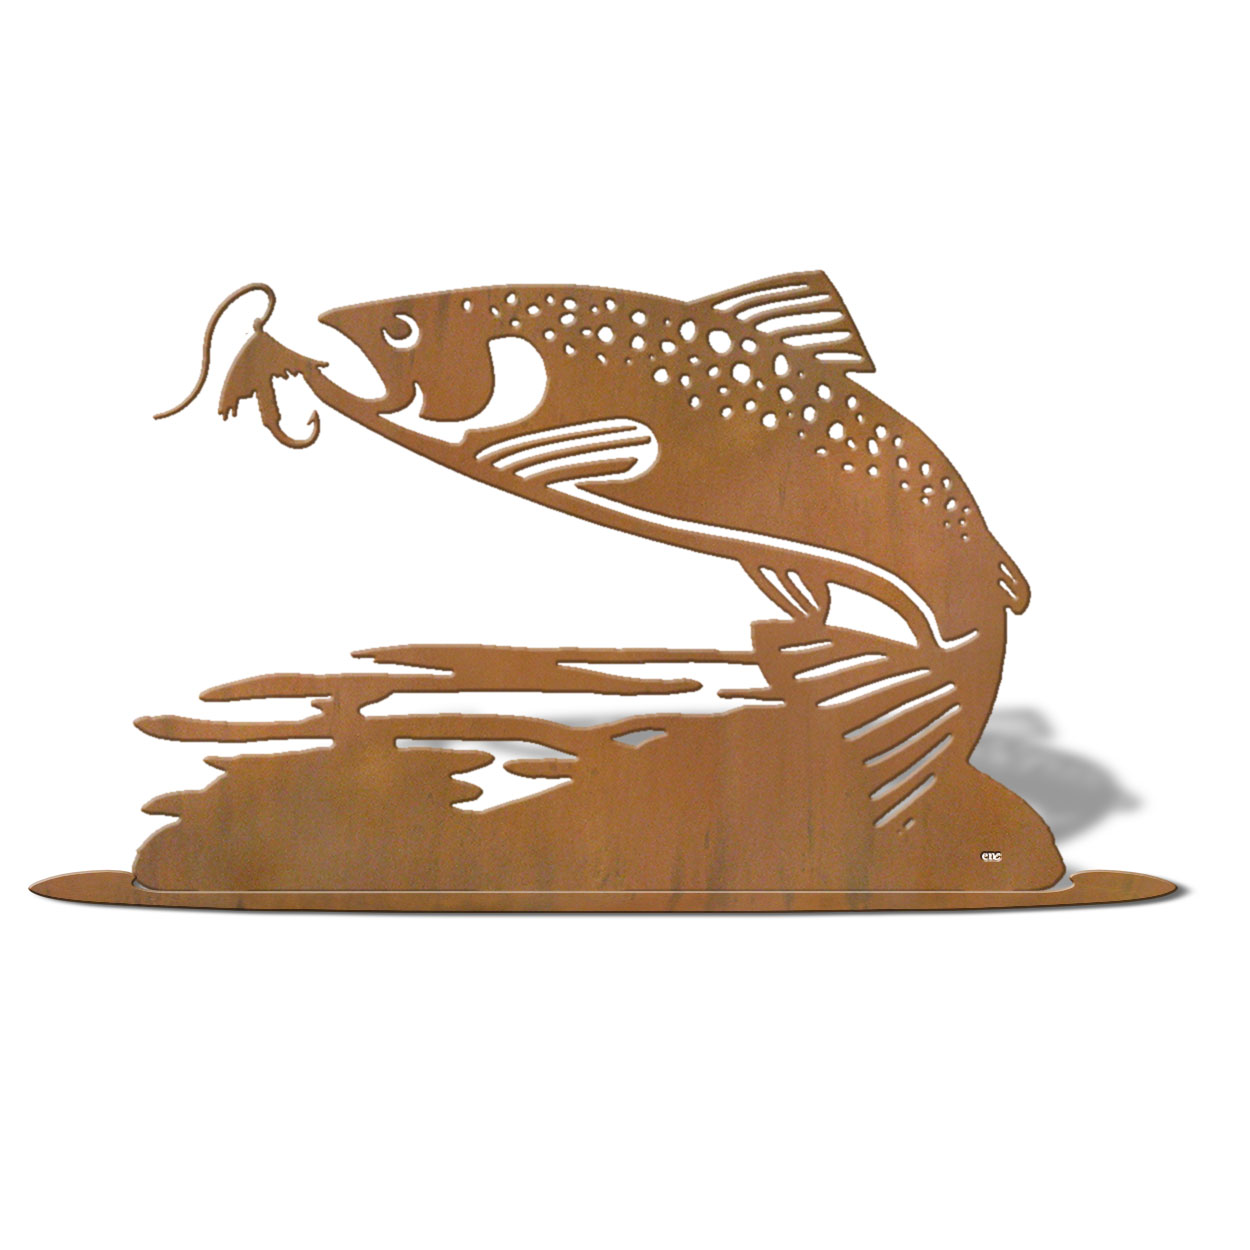 623042r - Tabletop Art - 20in x 13in - Trout Fishing - Rust Patina